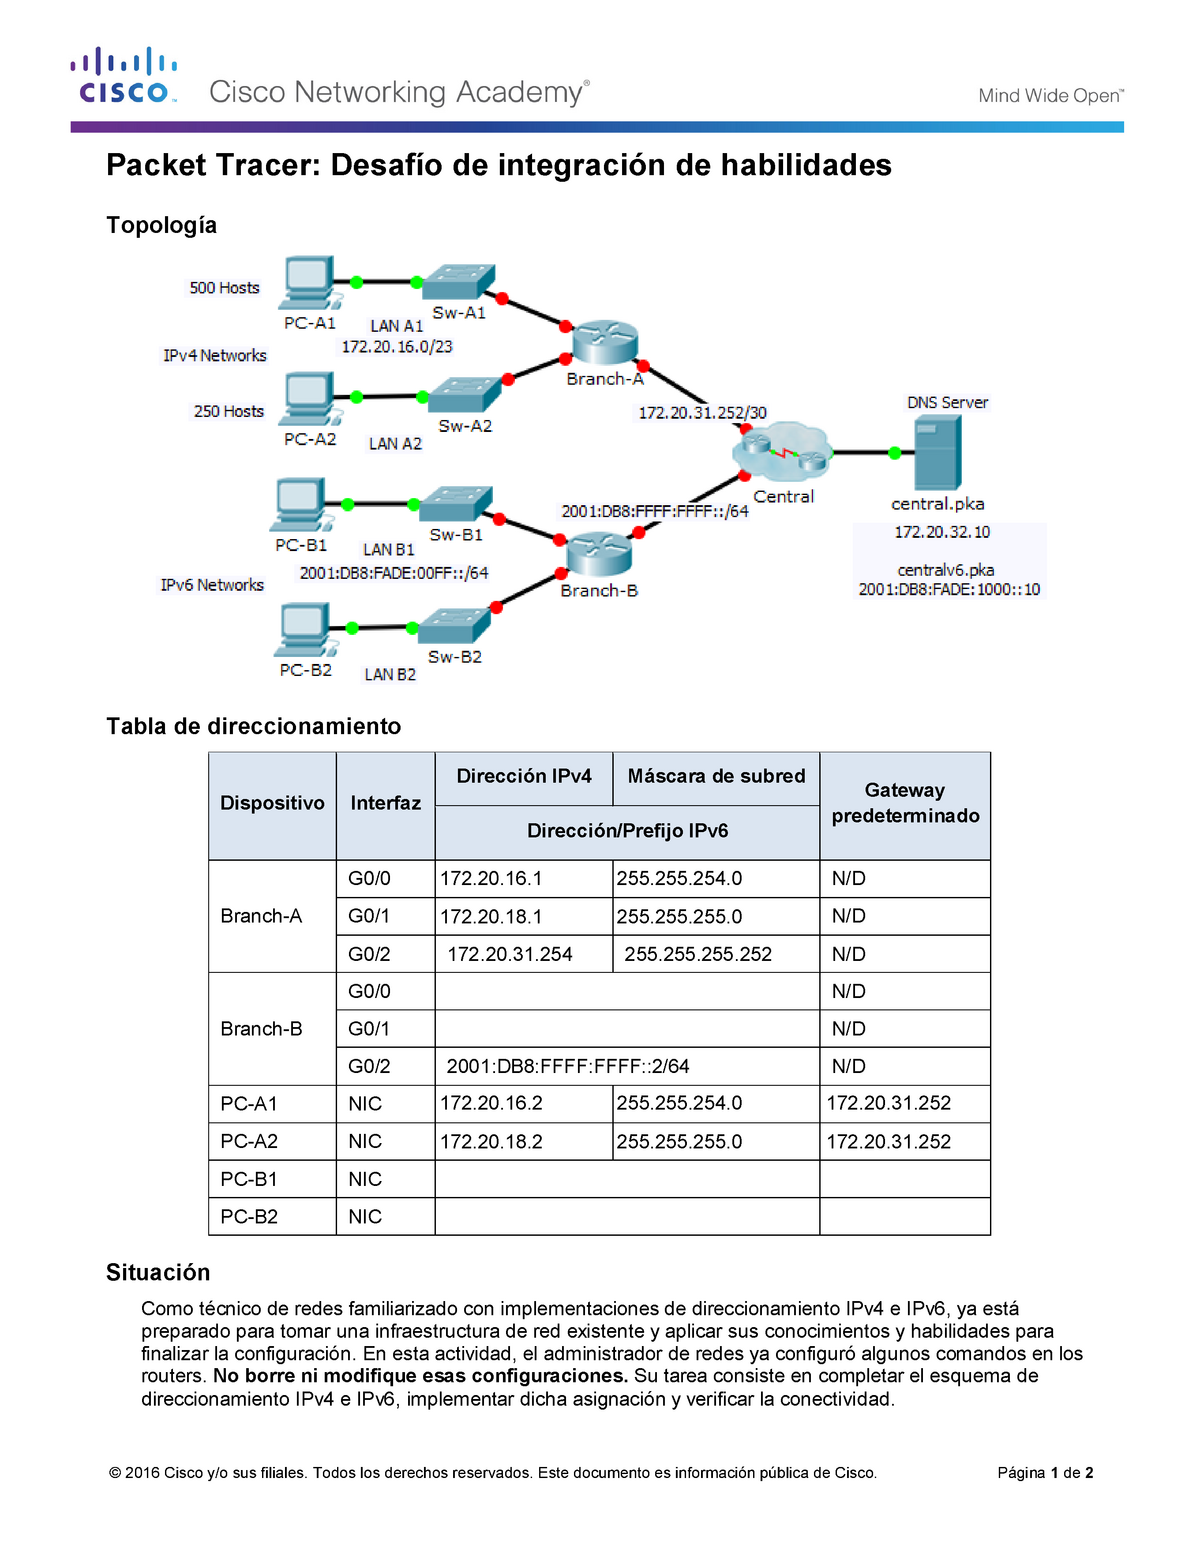 8.4.1.2 packet tracer